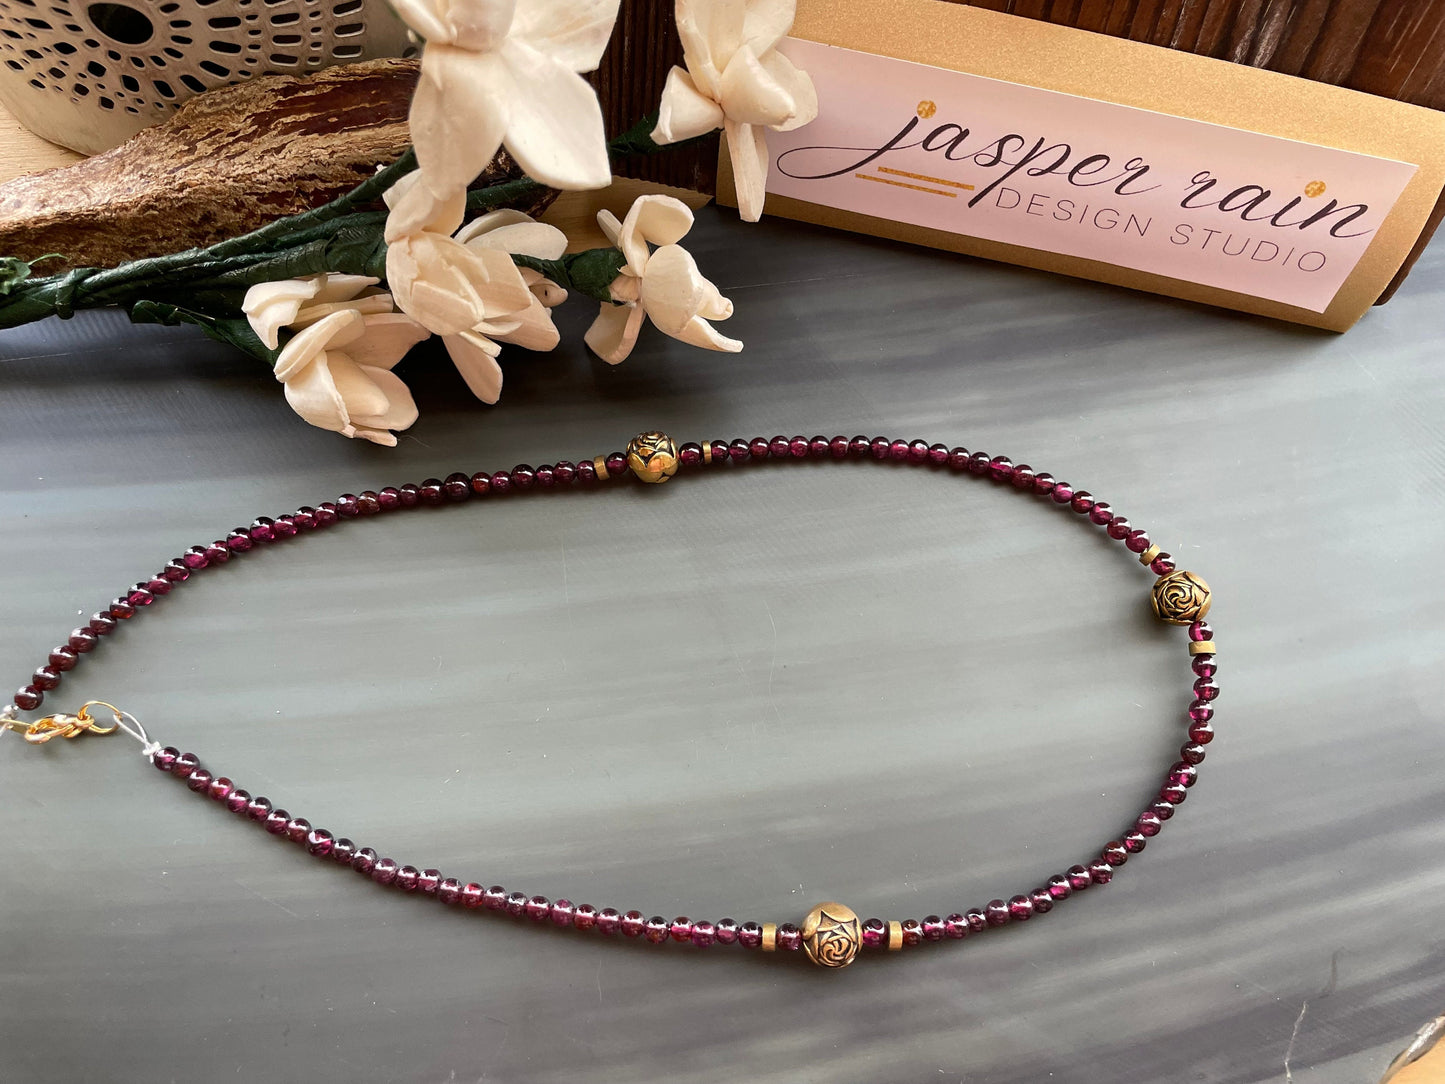 Natural Garnet and gold rose beaded necklace. Simple, lovely & can be used for layering, too. Handmade.